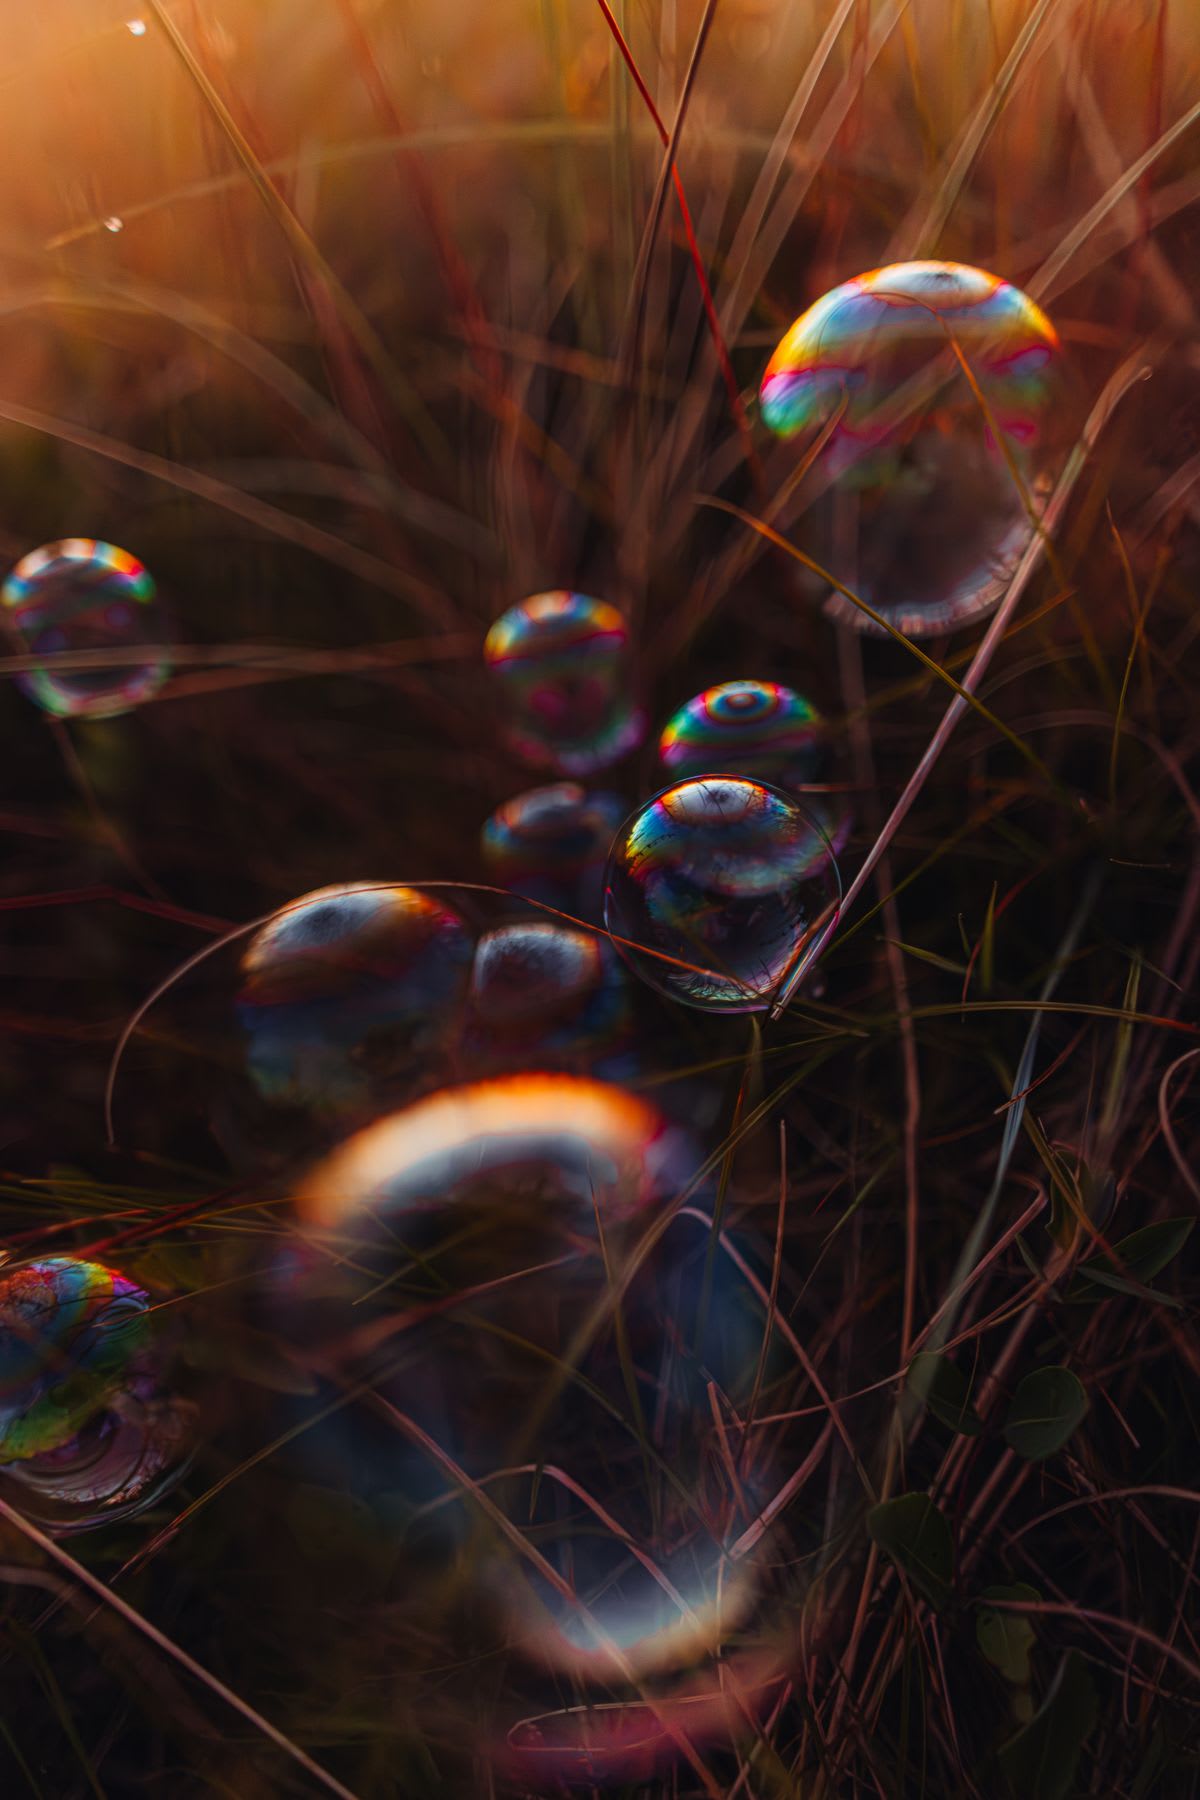 Iridescent bubbles nestled in tall grass illuminated by warm light.